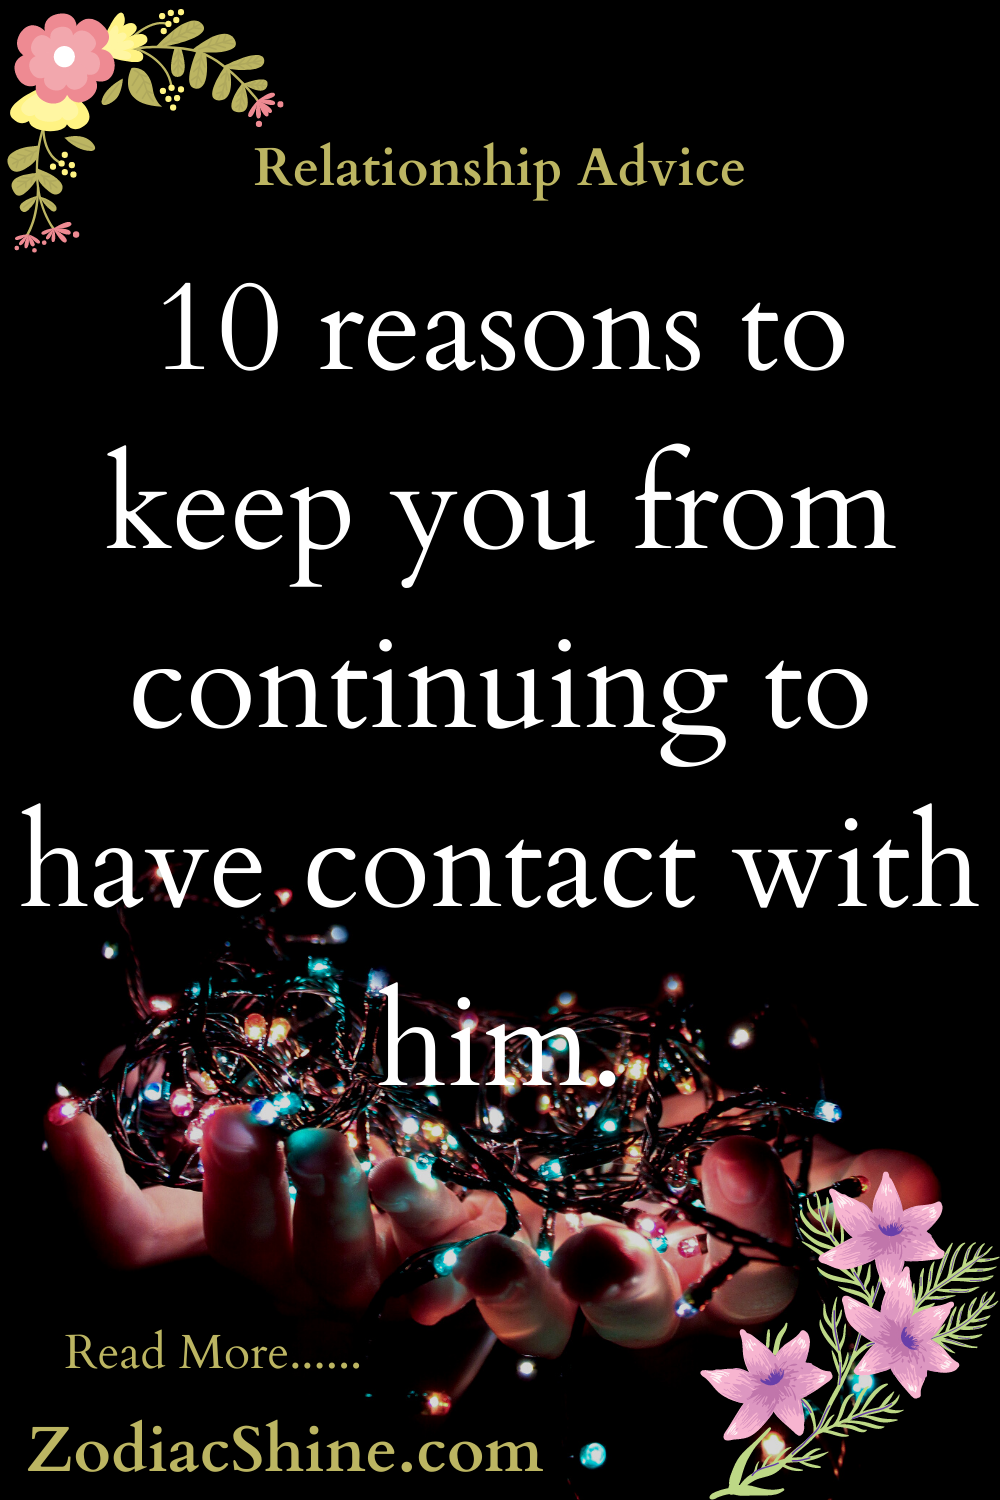 10 reasons to keep you from continuing to have contact with him.